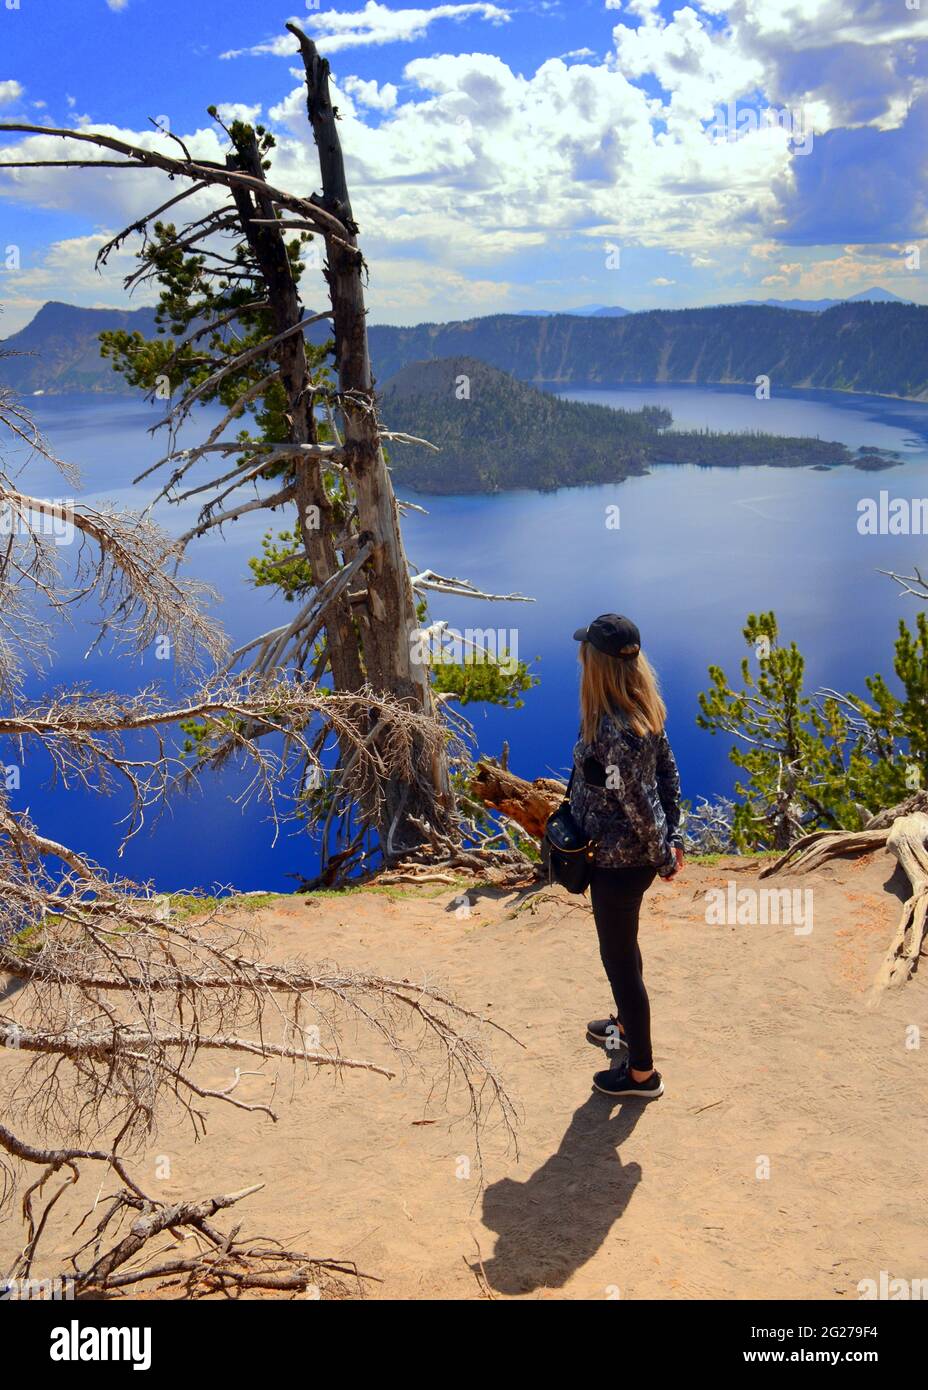 USA NATIONALPARKS; CRATER LAKE, OREGON; TIEFSTER SEE IN DEN USA; WIZARD ISLAND (MODEL RELEASE) Stockfoto